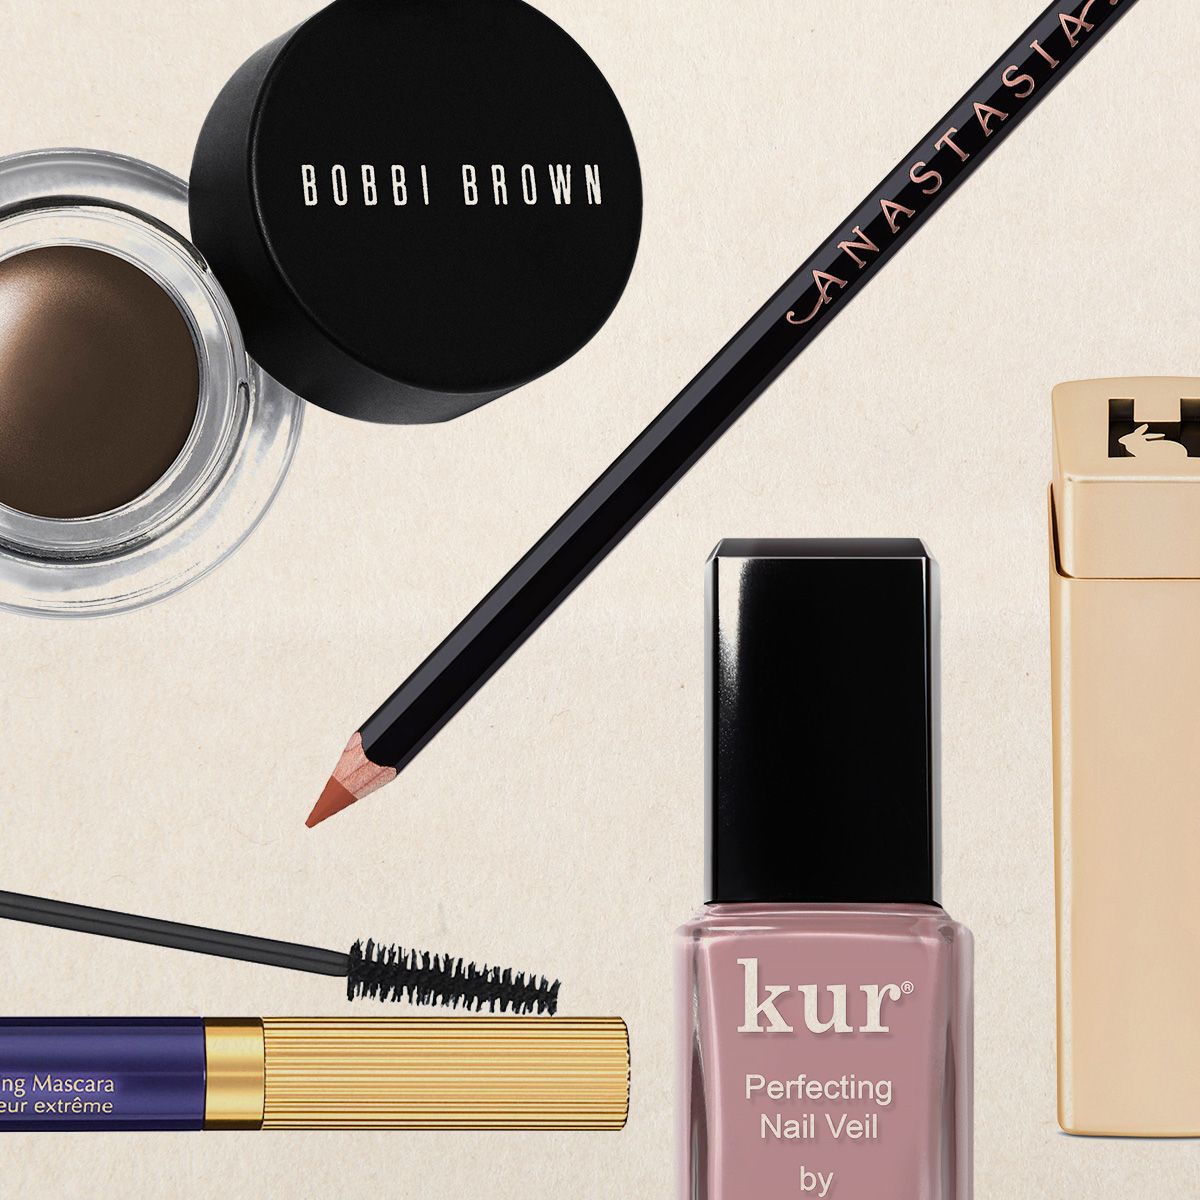 14 Makeup Essentials From Nordstrom That Live in My Beauty Drawer